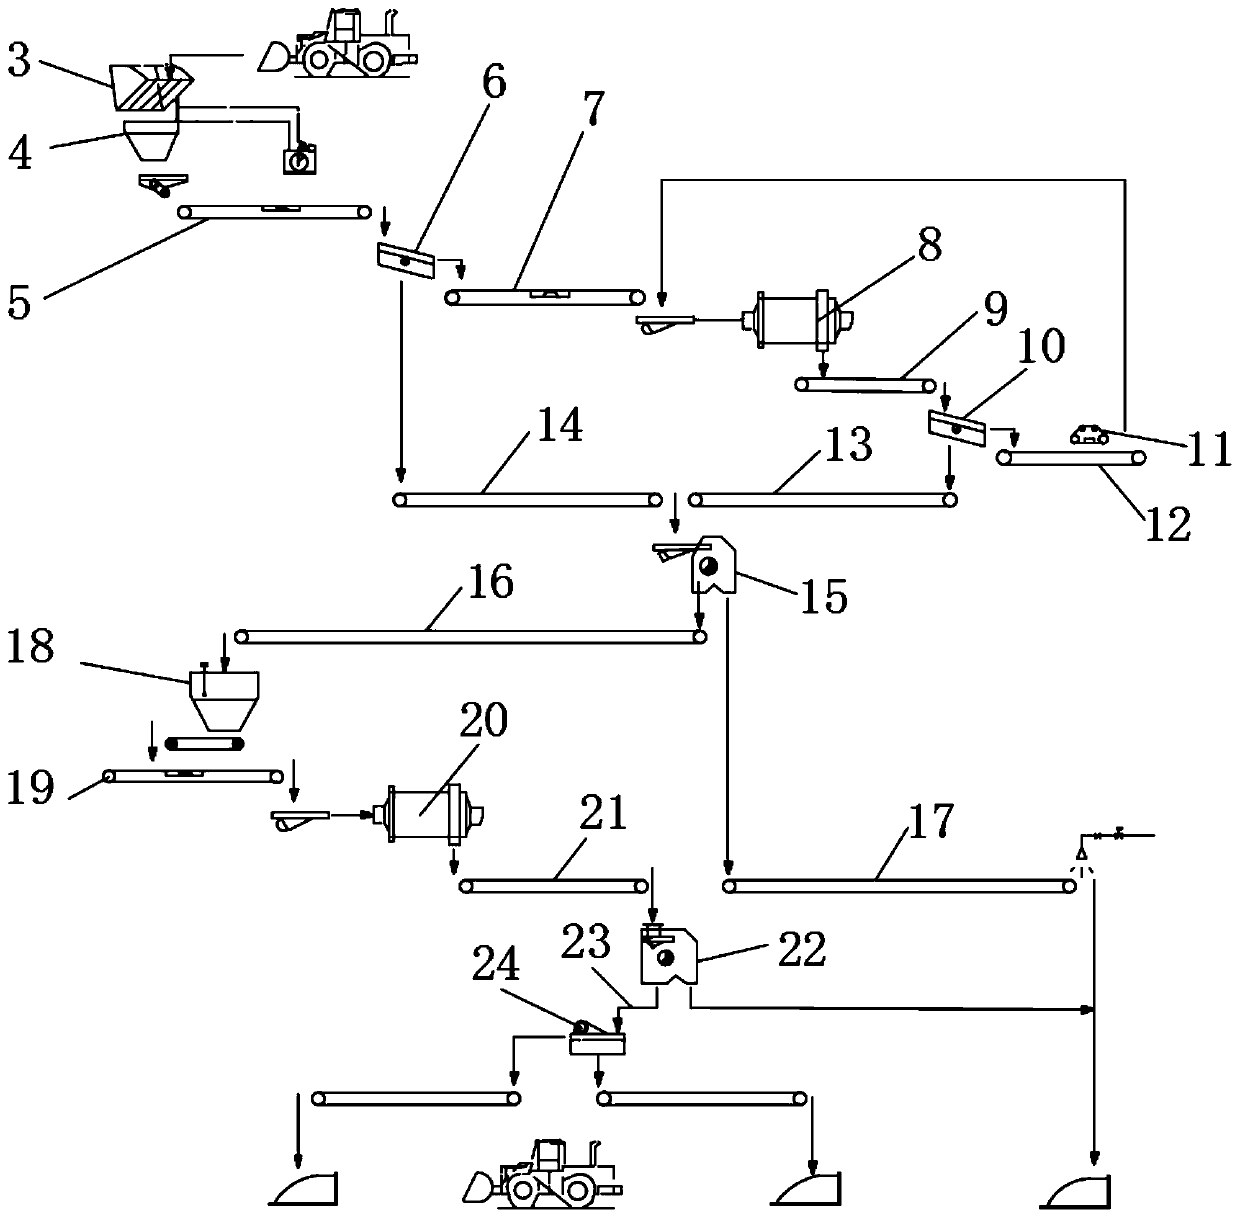 Steel slag combined grinding system and method